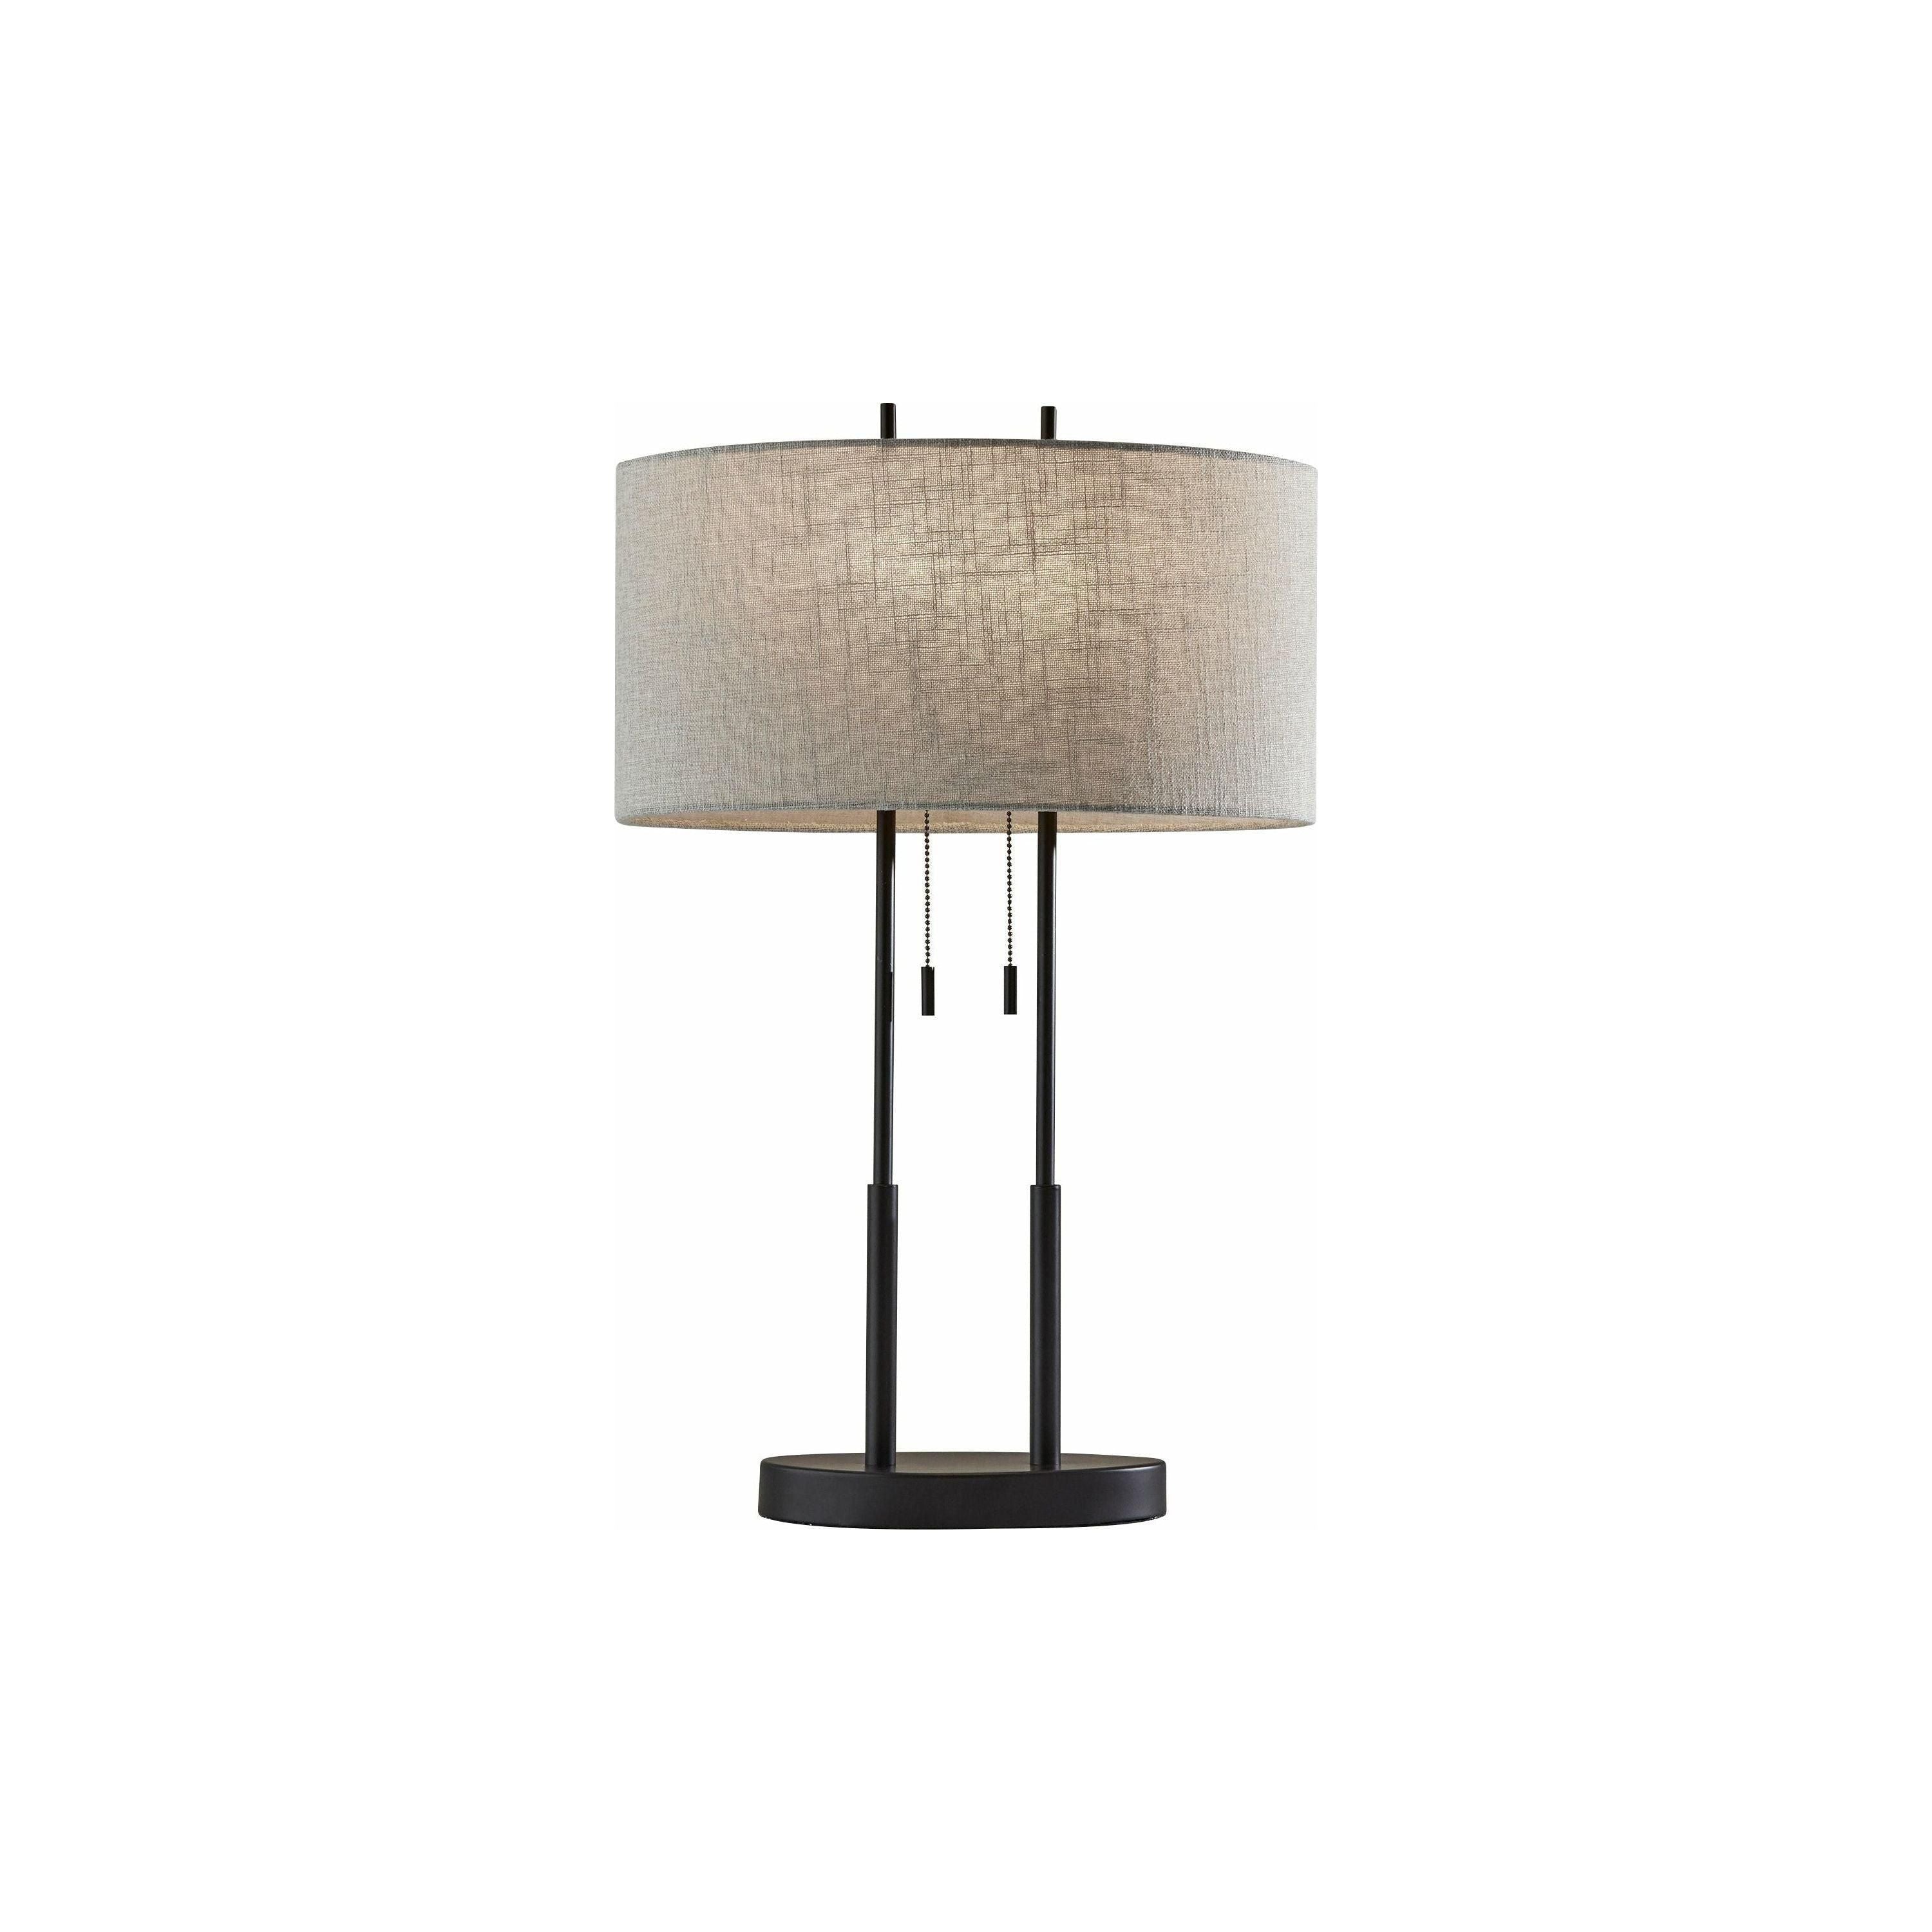 Adesso - Duet Table Lamp - Lights Canada